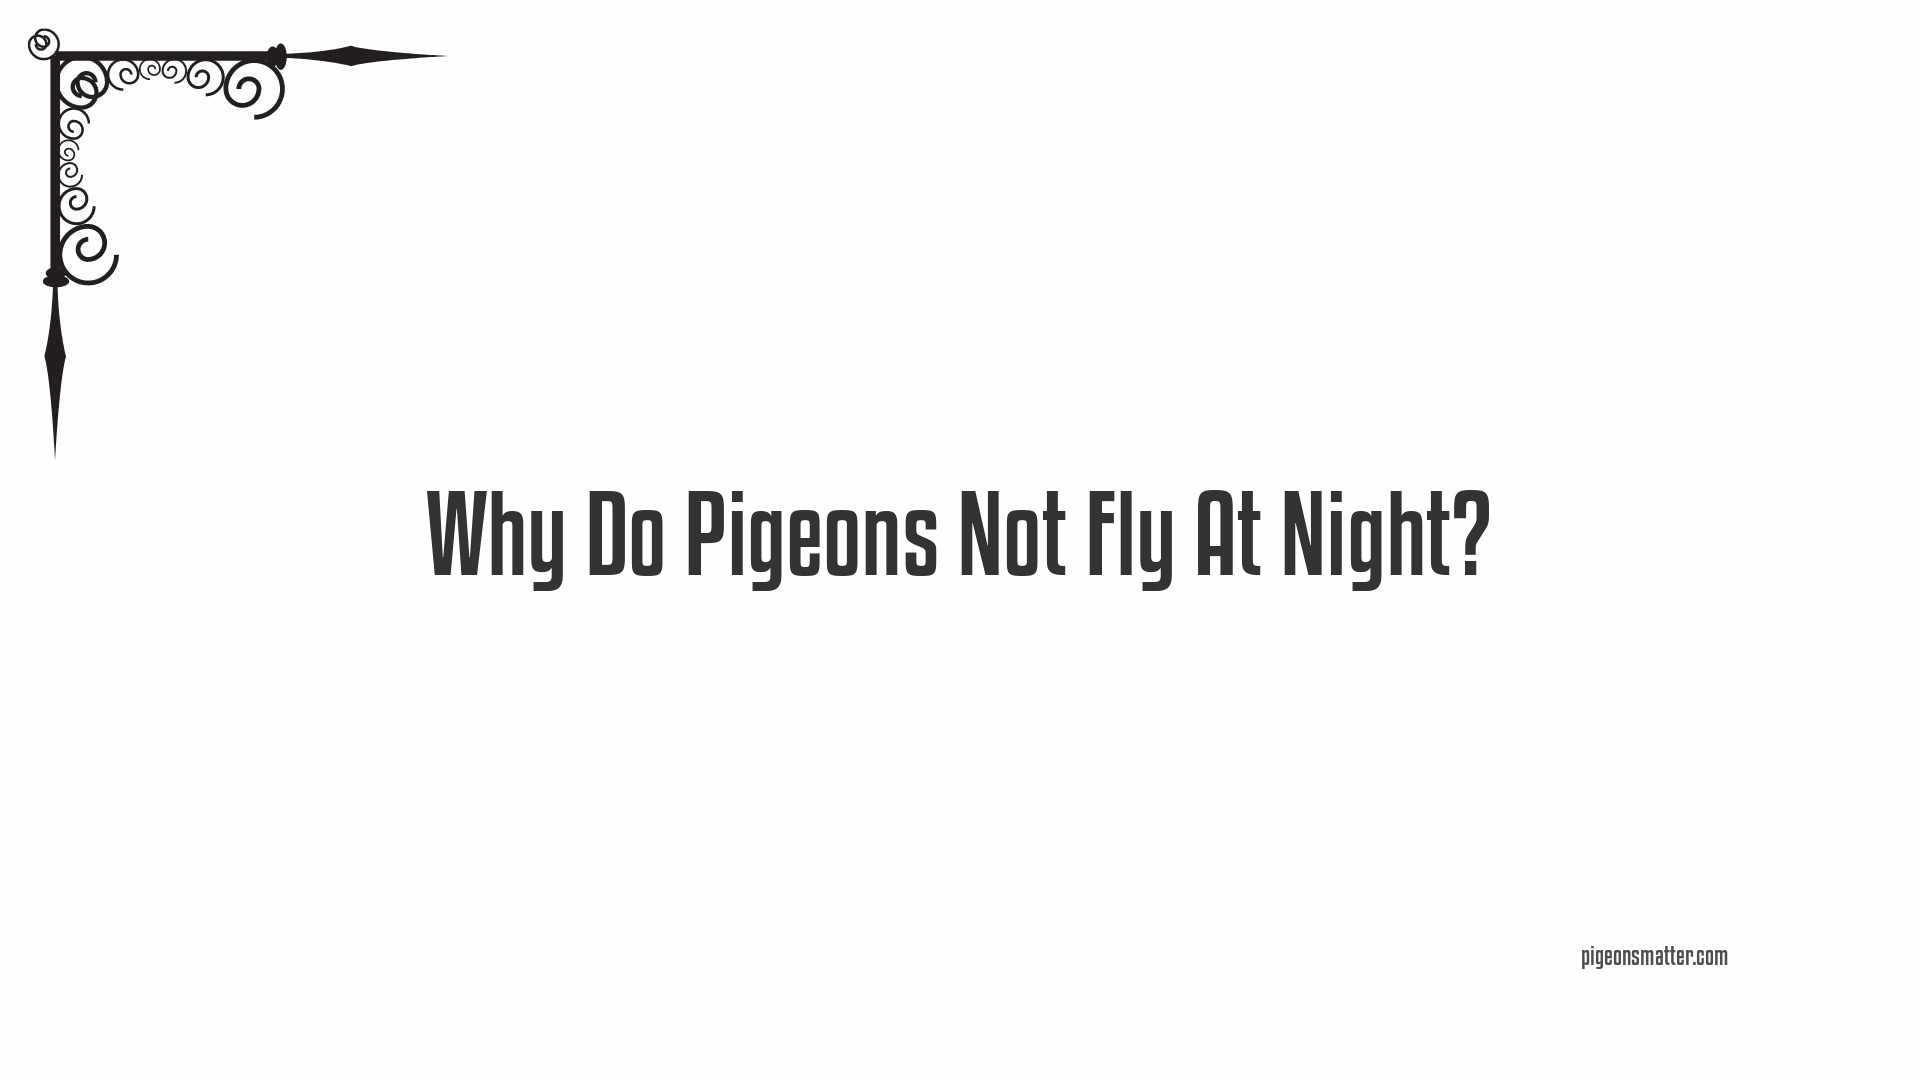 Why Do Pigeons Not Fly At Night?